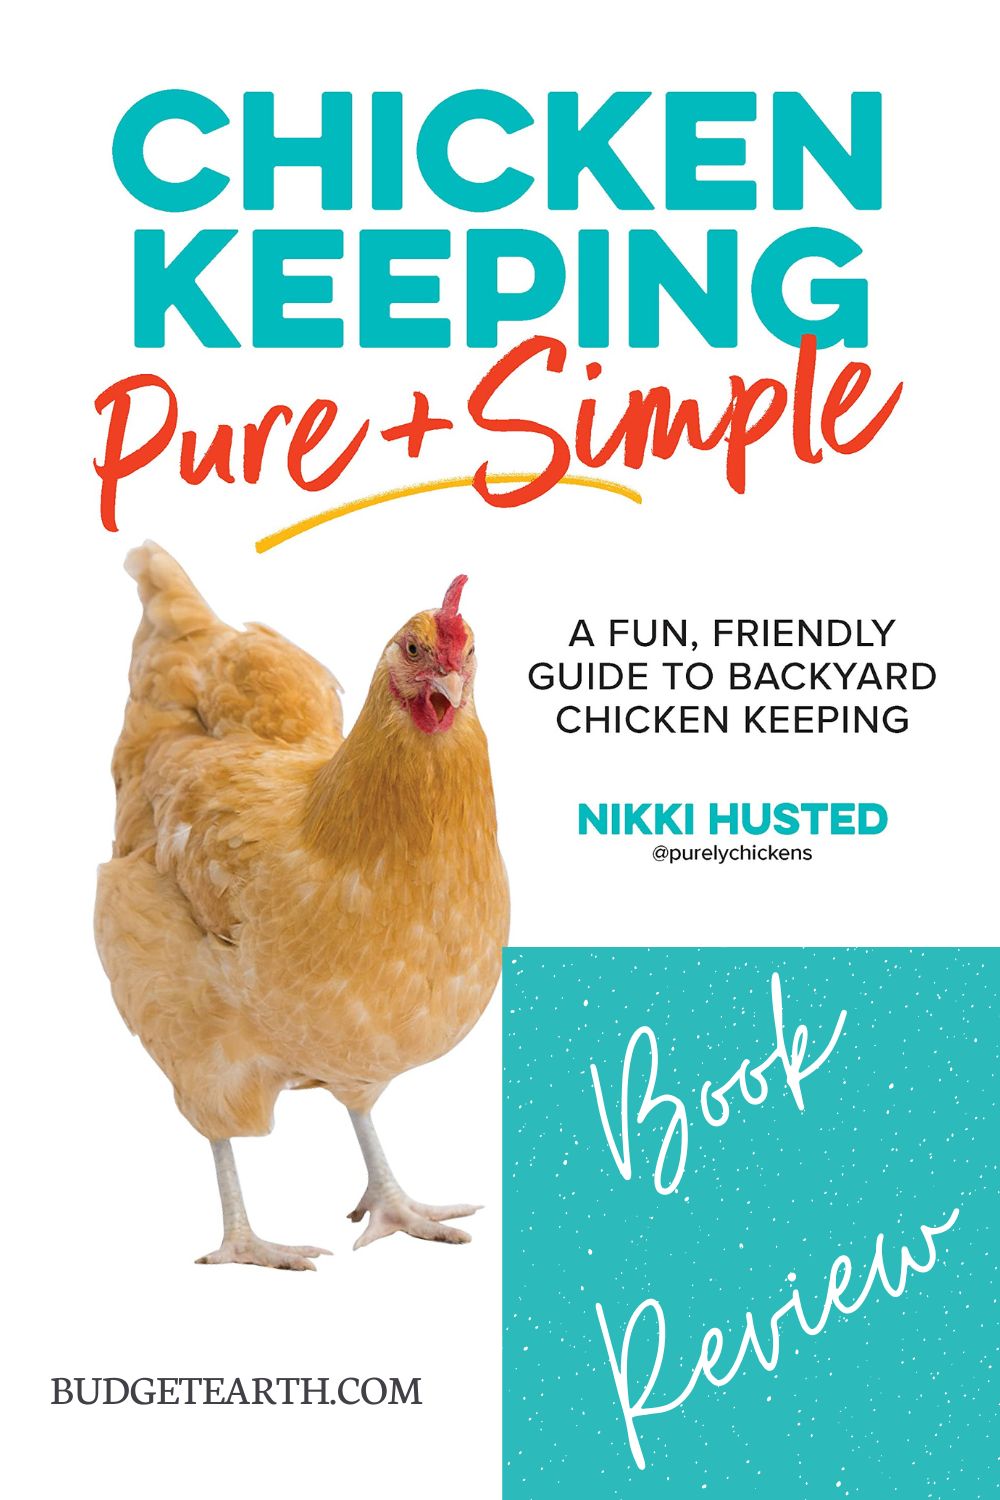 Chicken Keeping Pure & Simple book cover & review